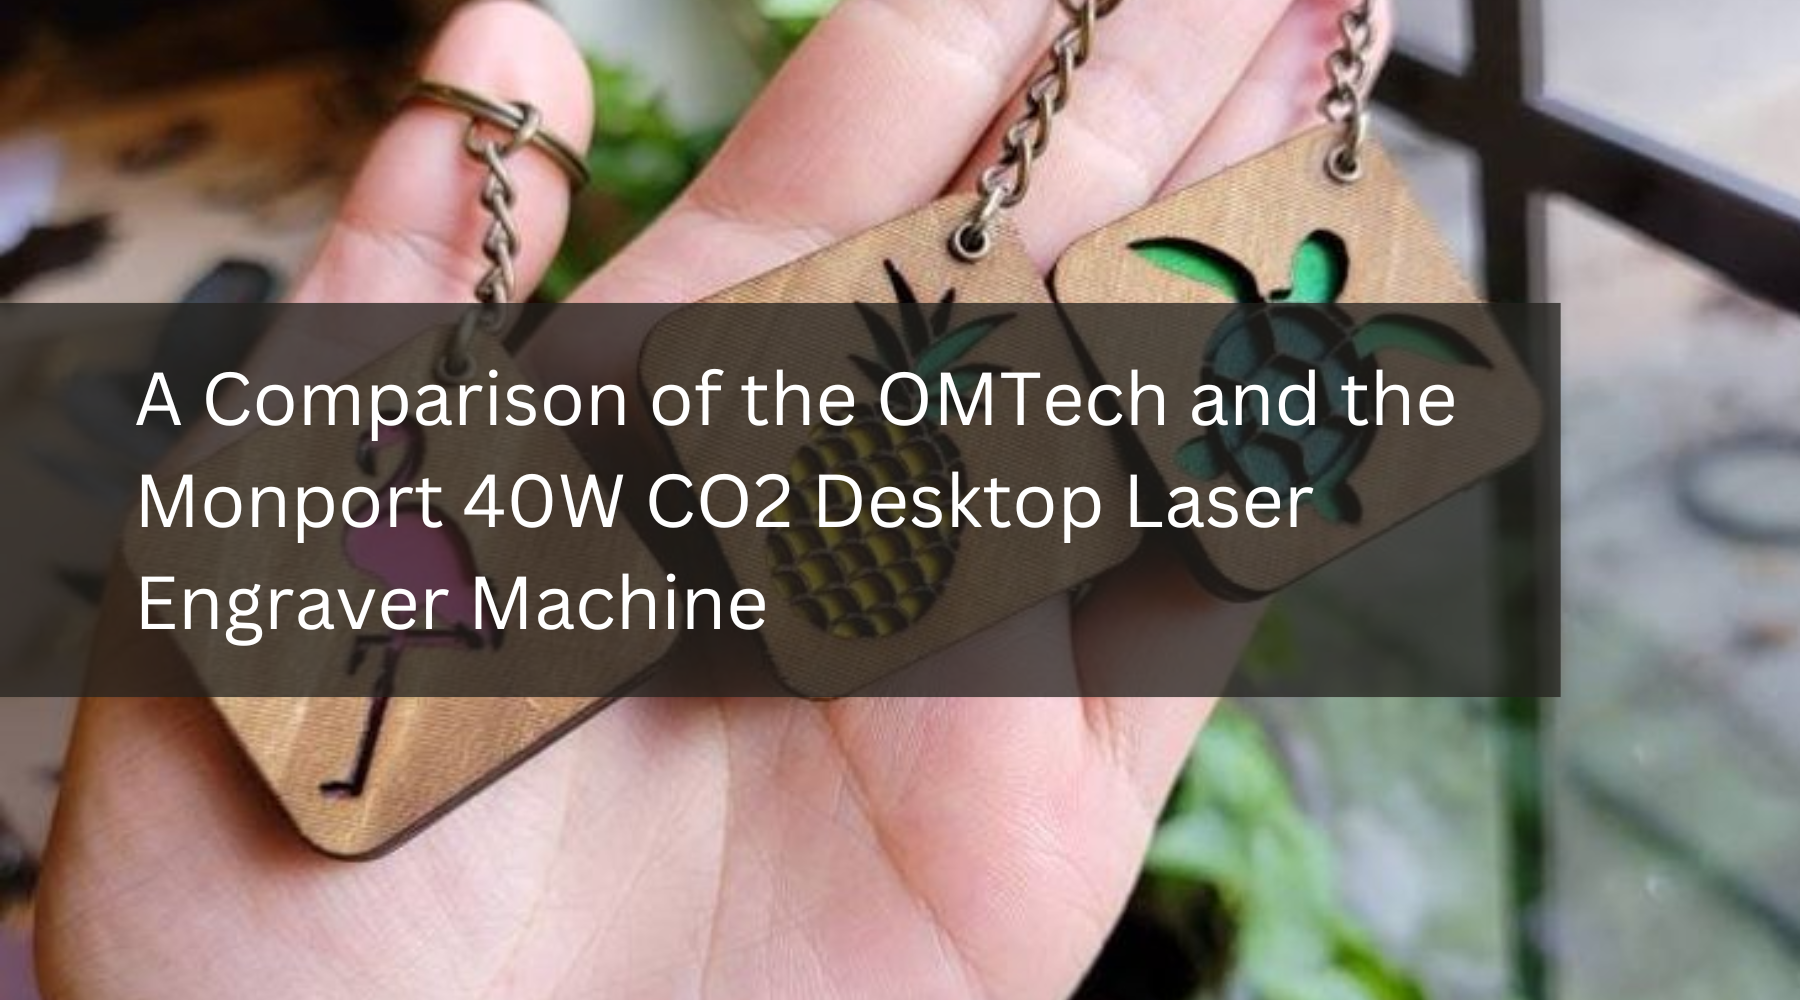 A Comparison of the OMTech and the Monport 40W CO2 Desktop Laser Engraver Machine